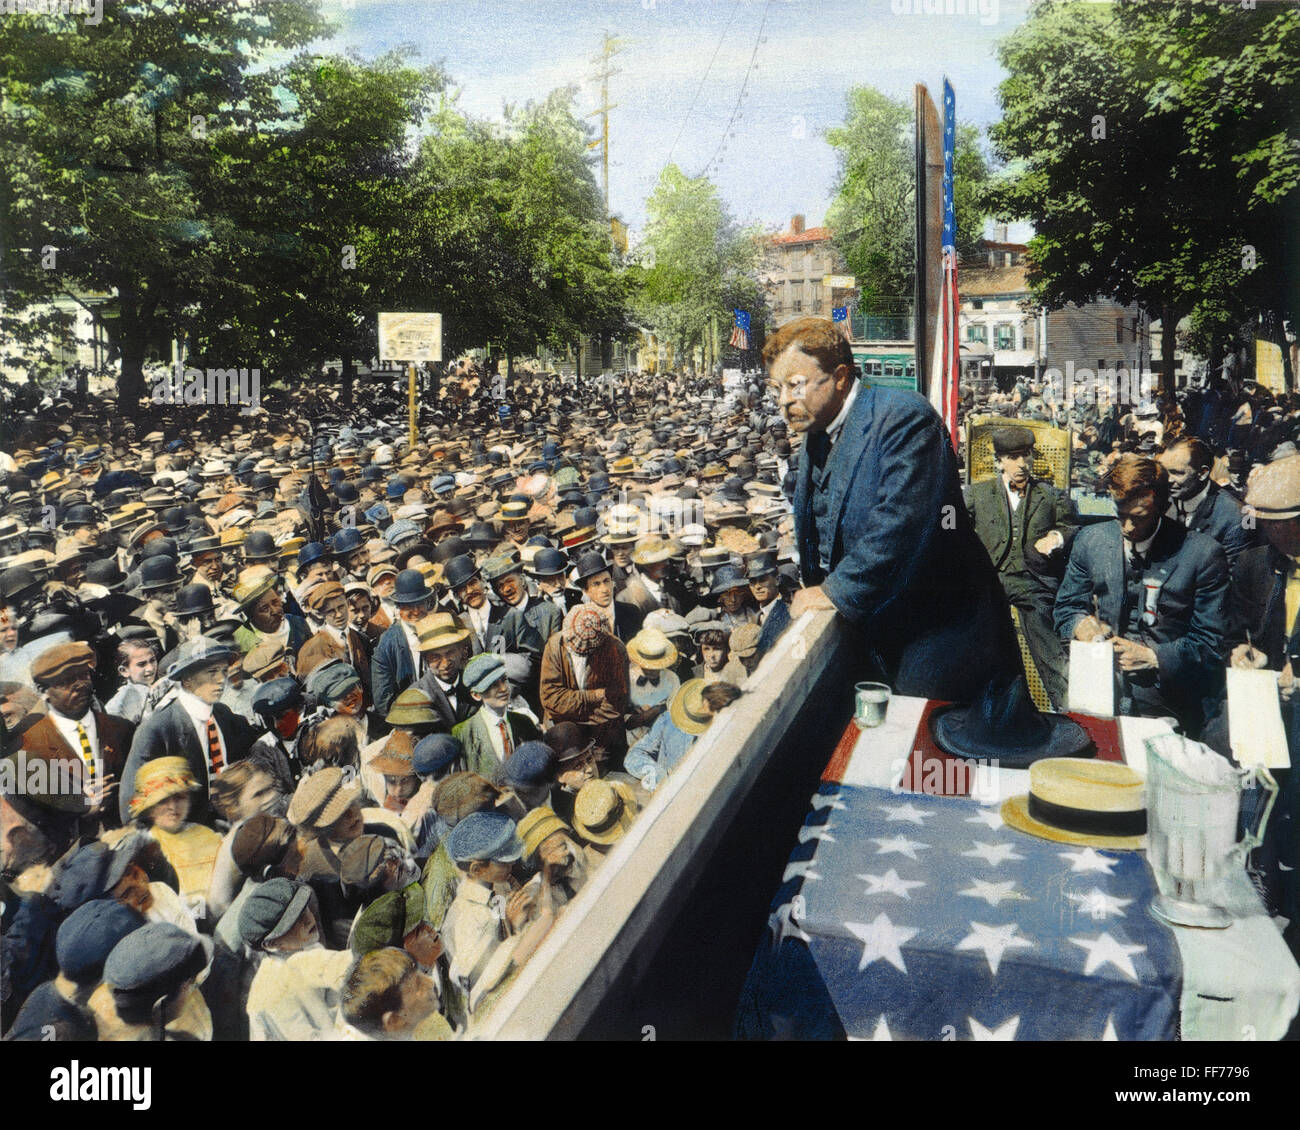 THEODORE ROOSEVELT /n(1858-1919) campaigning as the Progressive ('Bull Moose') party candidate for president in the summer of 1912. Stock Photo